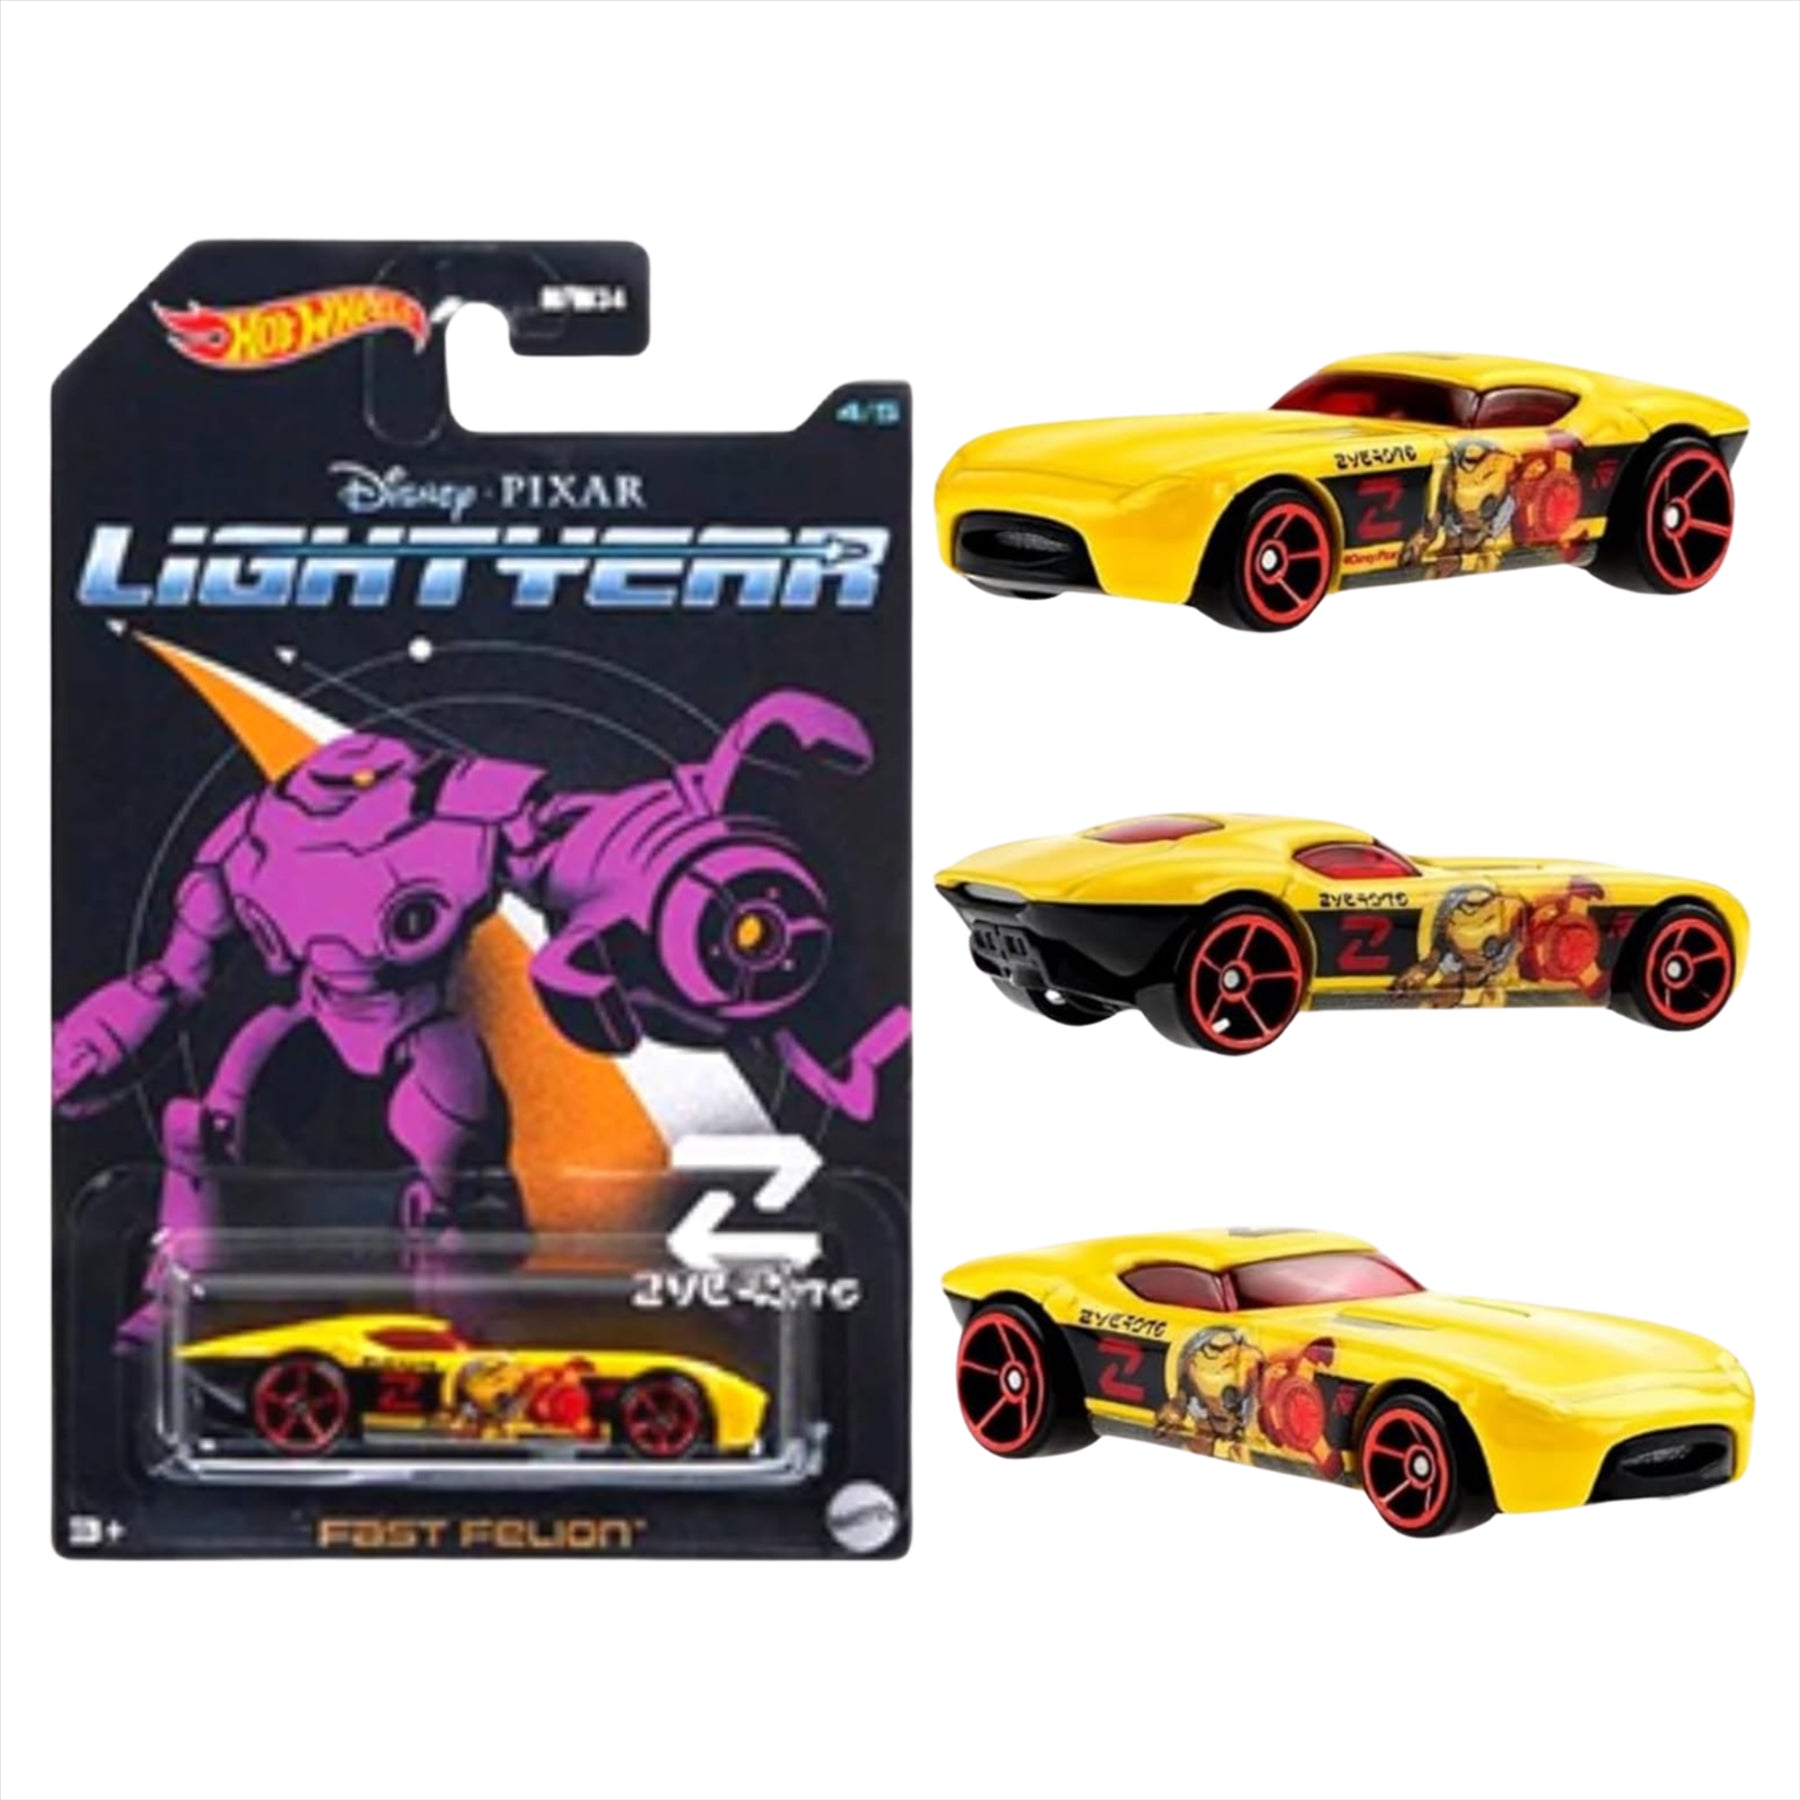 Hot Wheels Diecast Lightyear Character Cars - Sir Ominous, Hiway Hauler 2,  67 Chevelle SS 396, Fast Felion & Amazoom - All 5